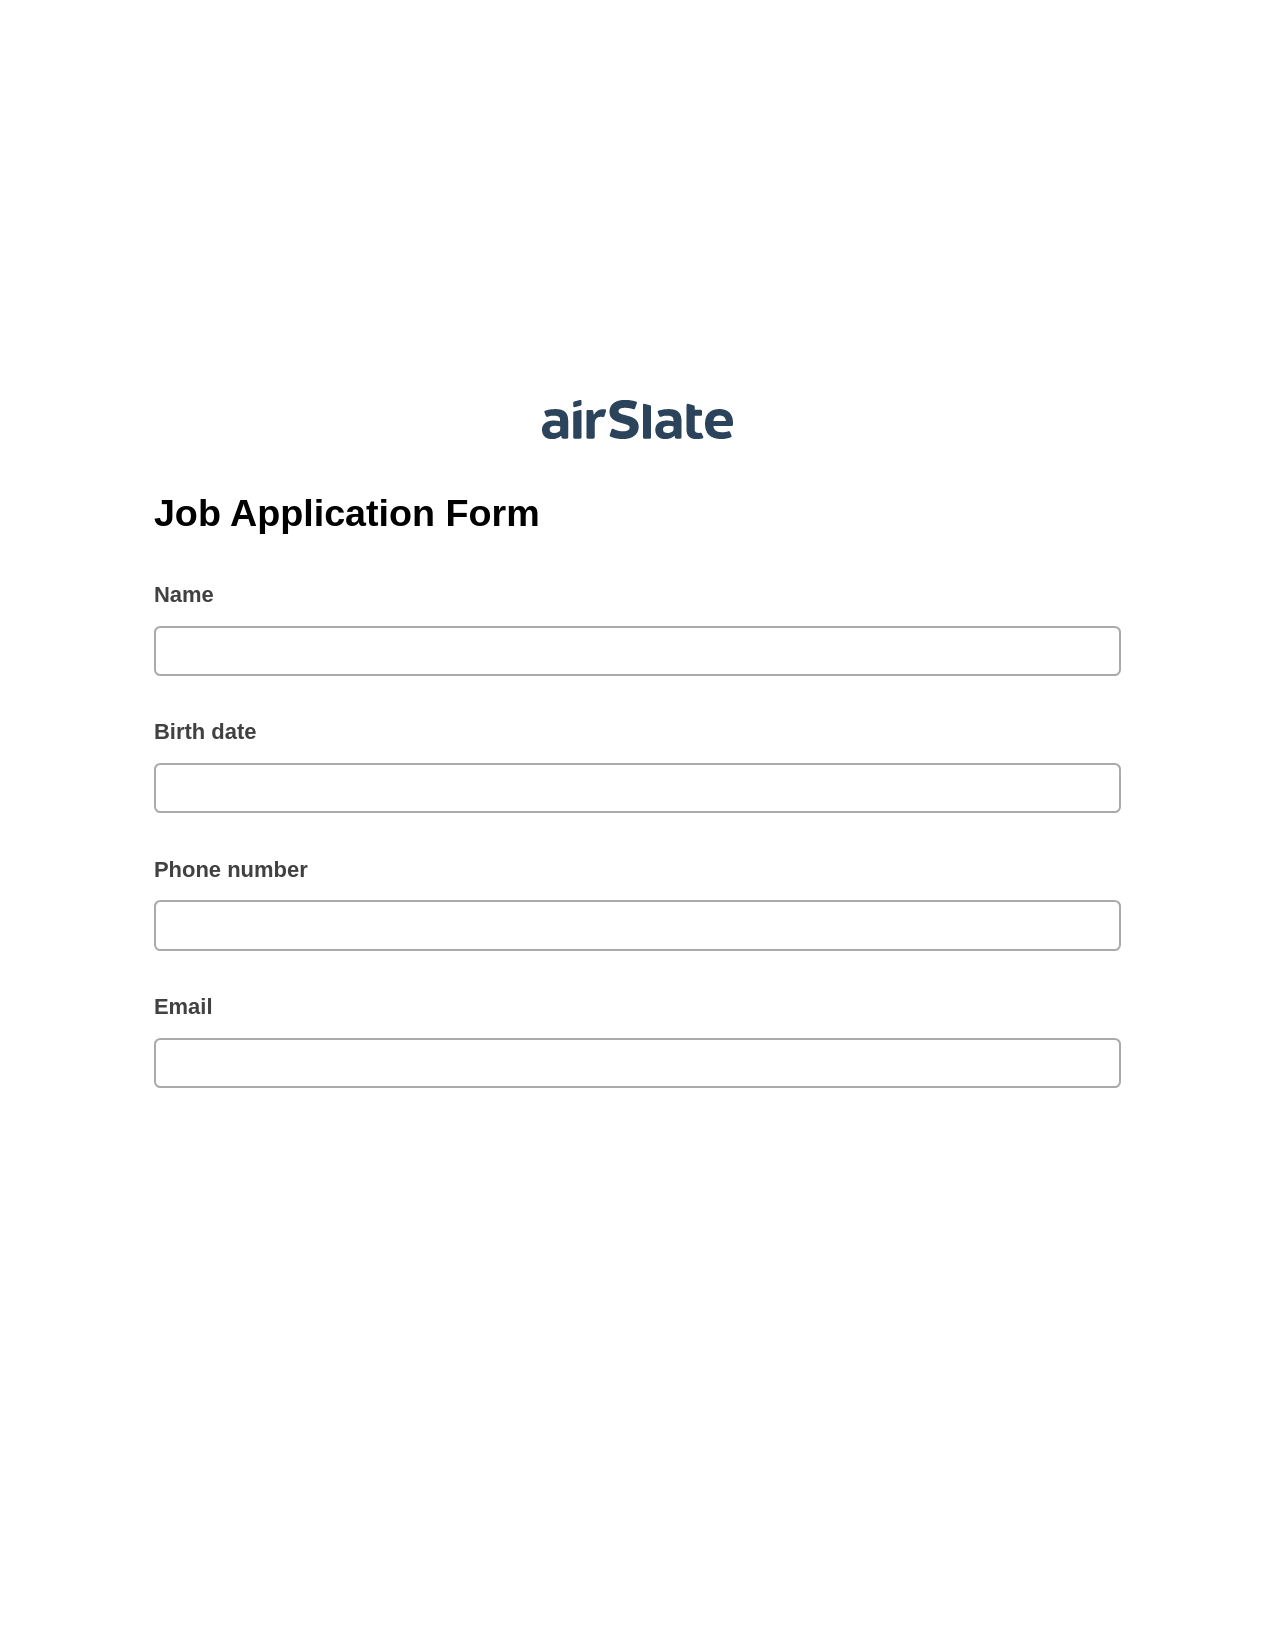 Job Application Form Pre-fill Slate from MS Dynamics 365 Records Bot, Google Sheet Two-Way Binding Bot, Export to Smartsheet